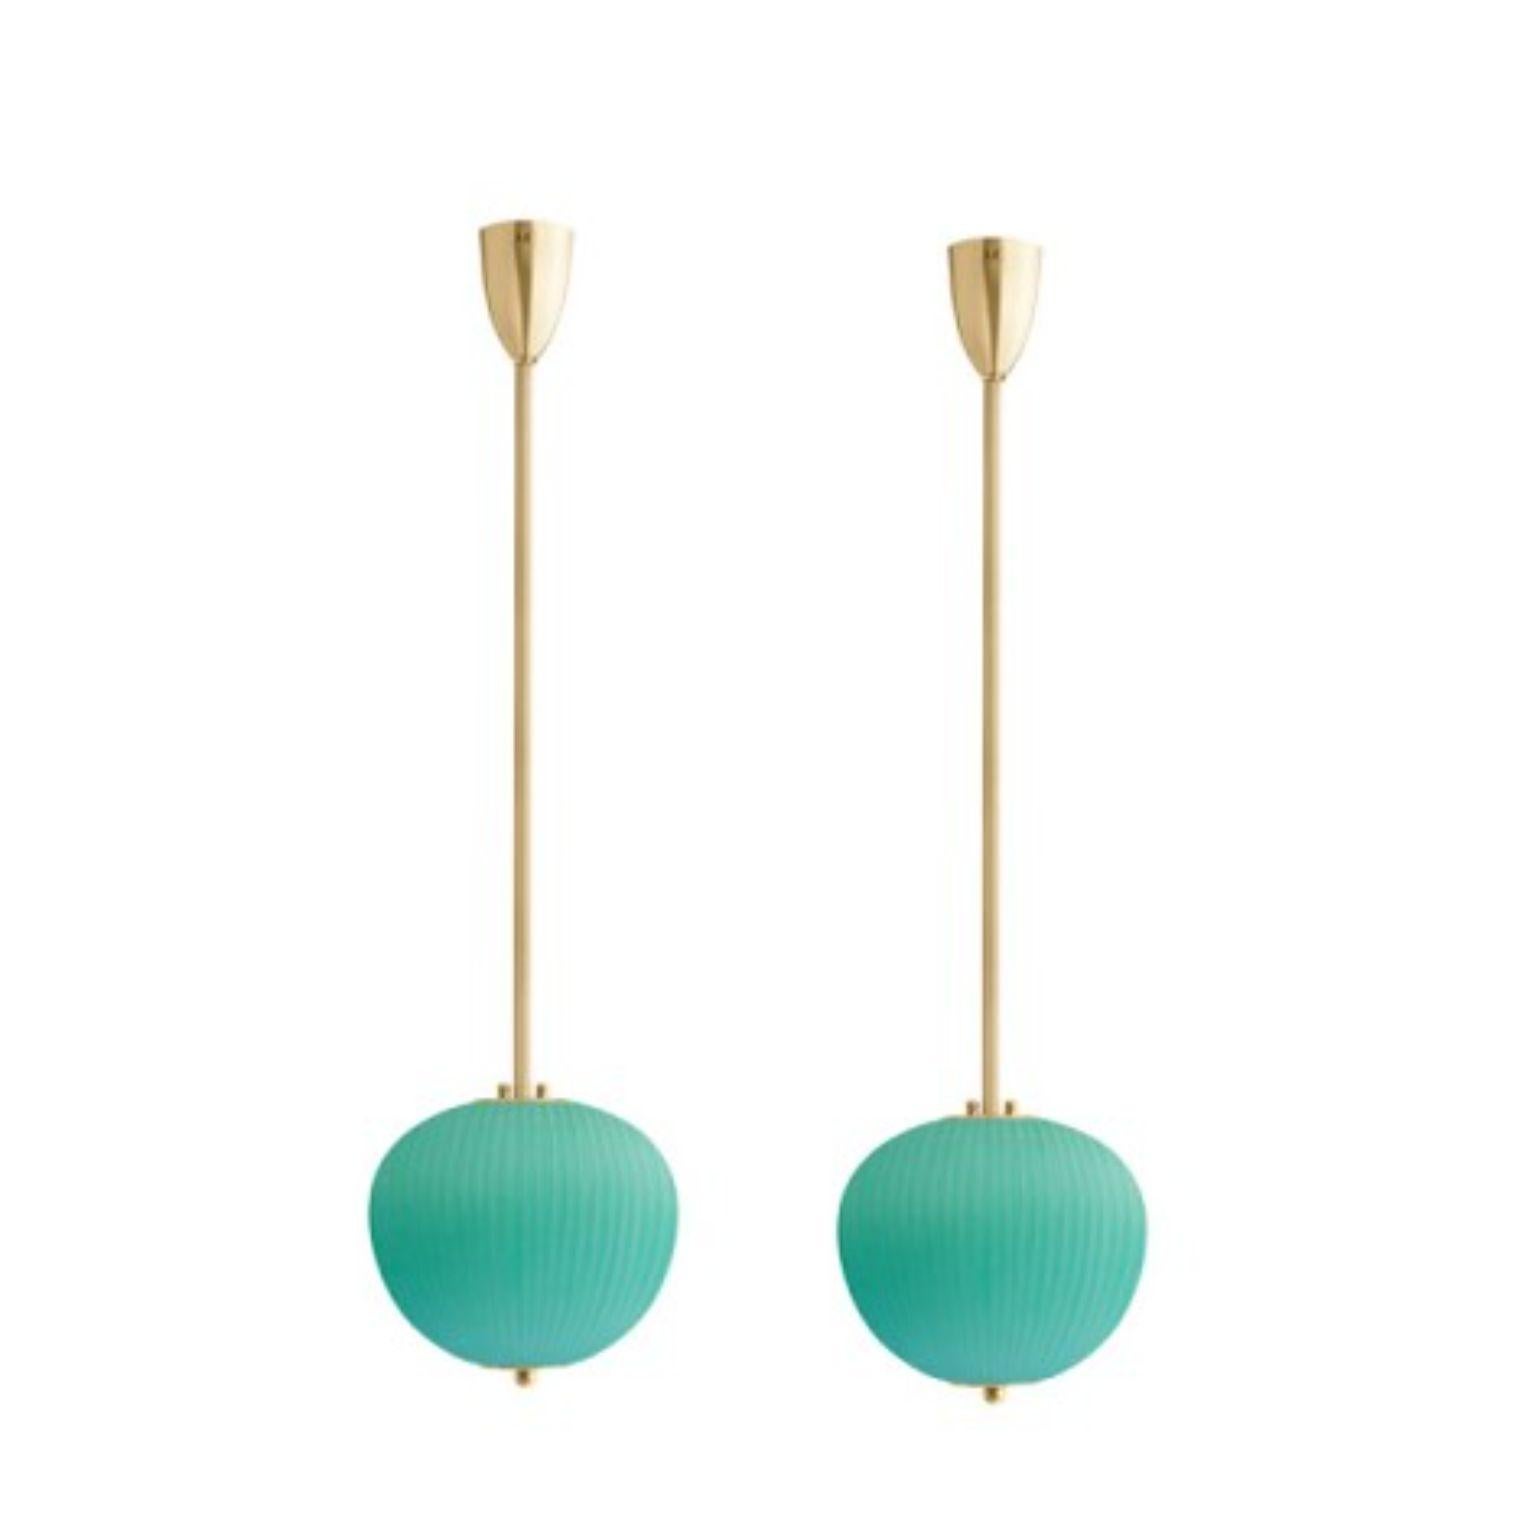 Pendant China 03 by Magic Circus Editions.
Dimensions: H 90 x W 26.2 x D 26.2 cm, also available in H 110, 130, 150, 175, 190.
Materials: brass, mouth blown glass sculpted with a diamond saw.
Colour: jade green.

Available finishes: brass,